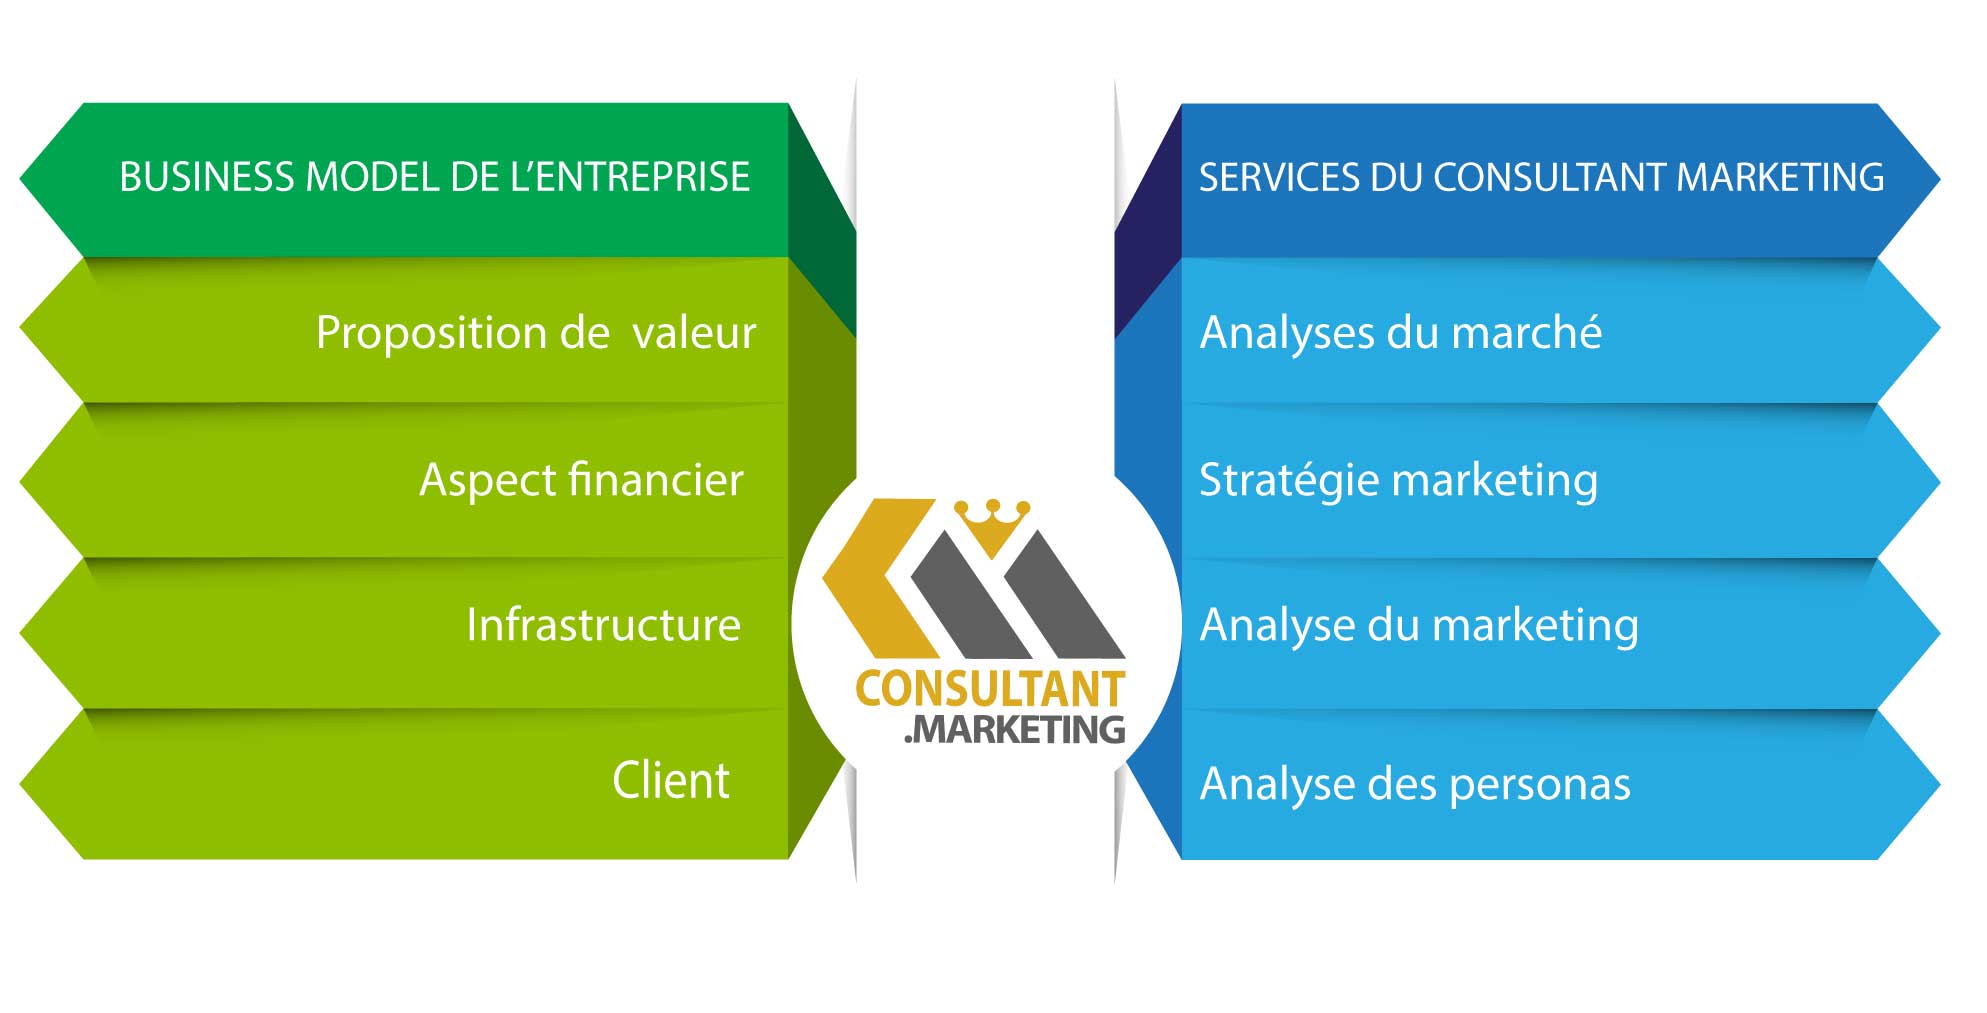 services consultant marketing adapte-business model entreprise